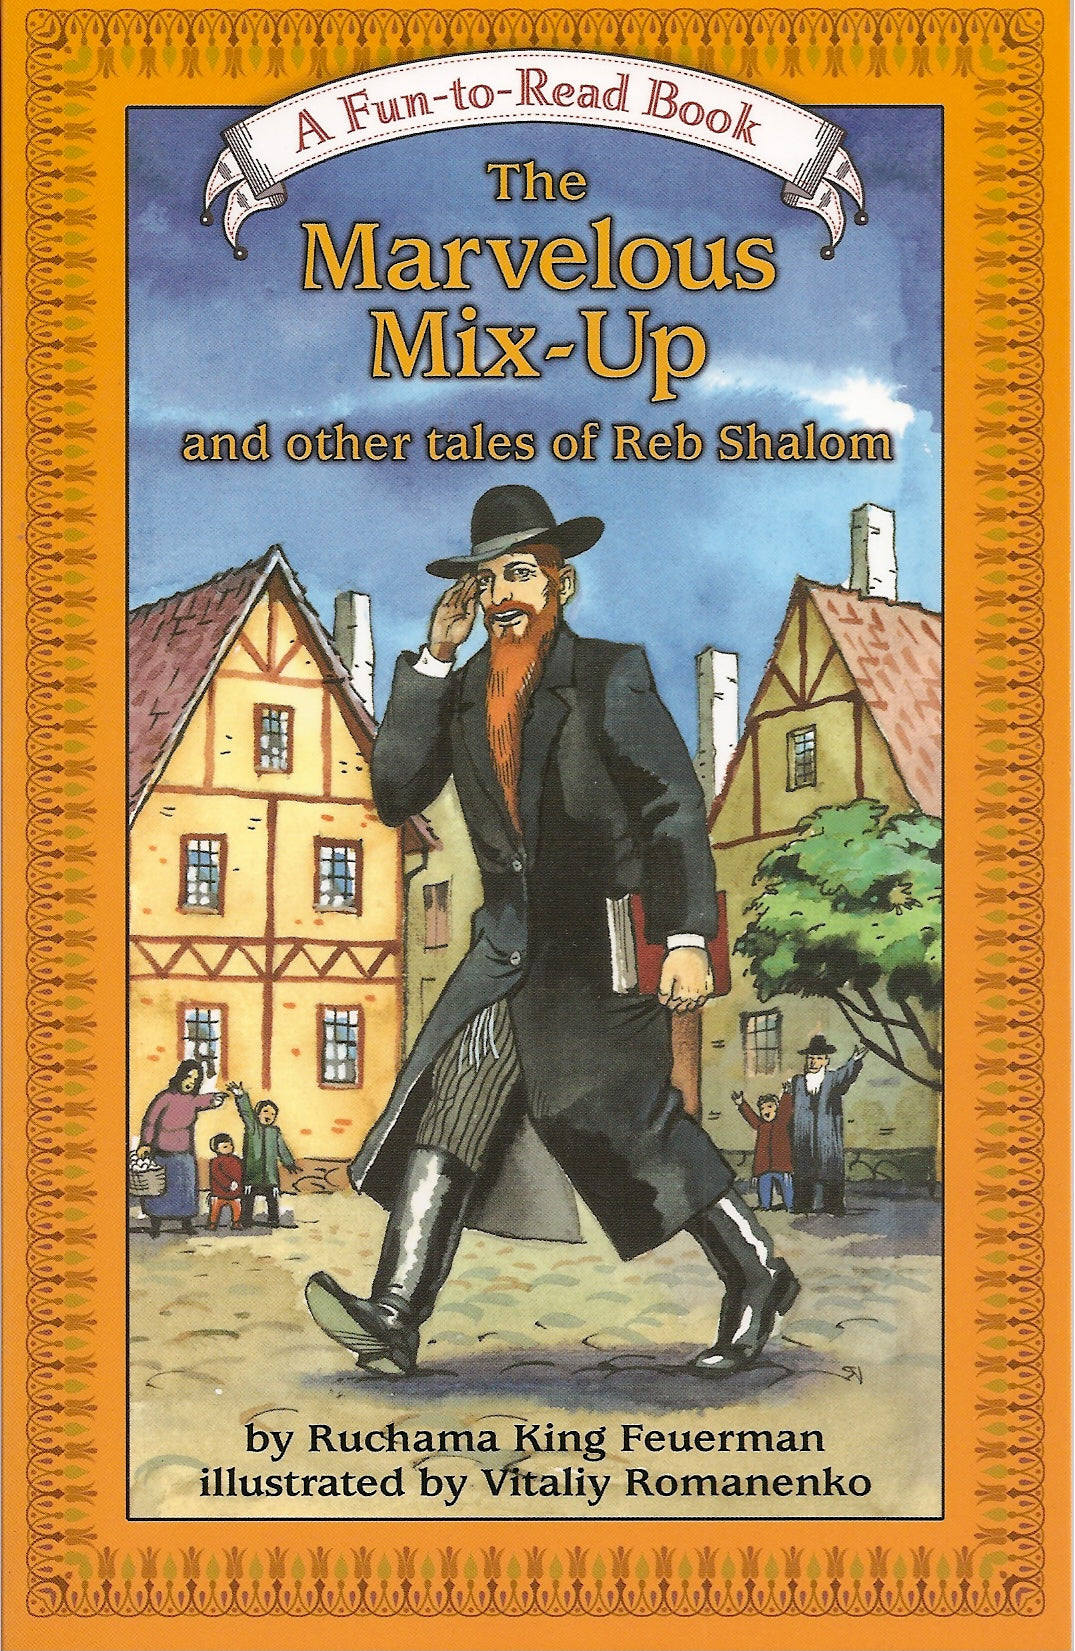 The Marvelous Mix-Up and other tales of Reb Shalom